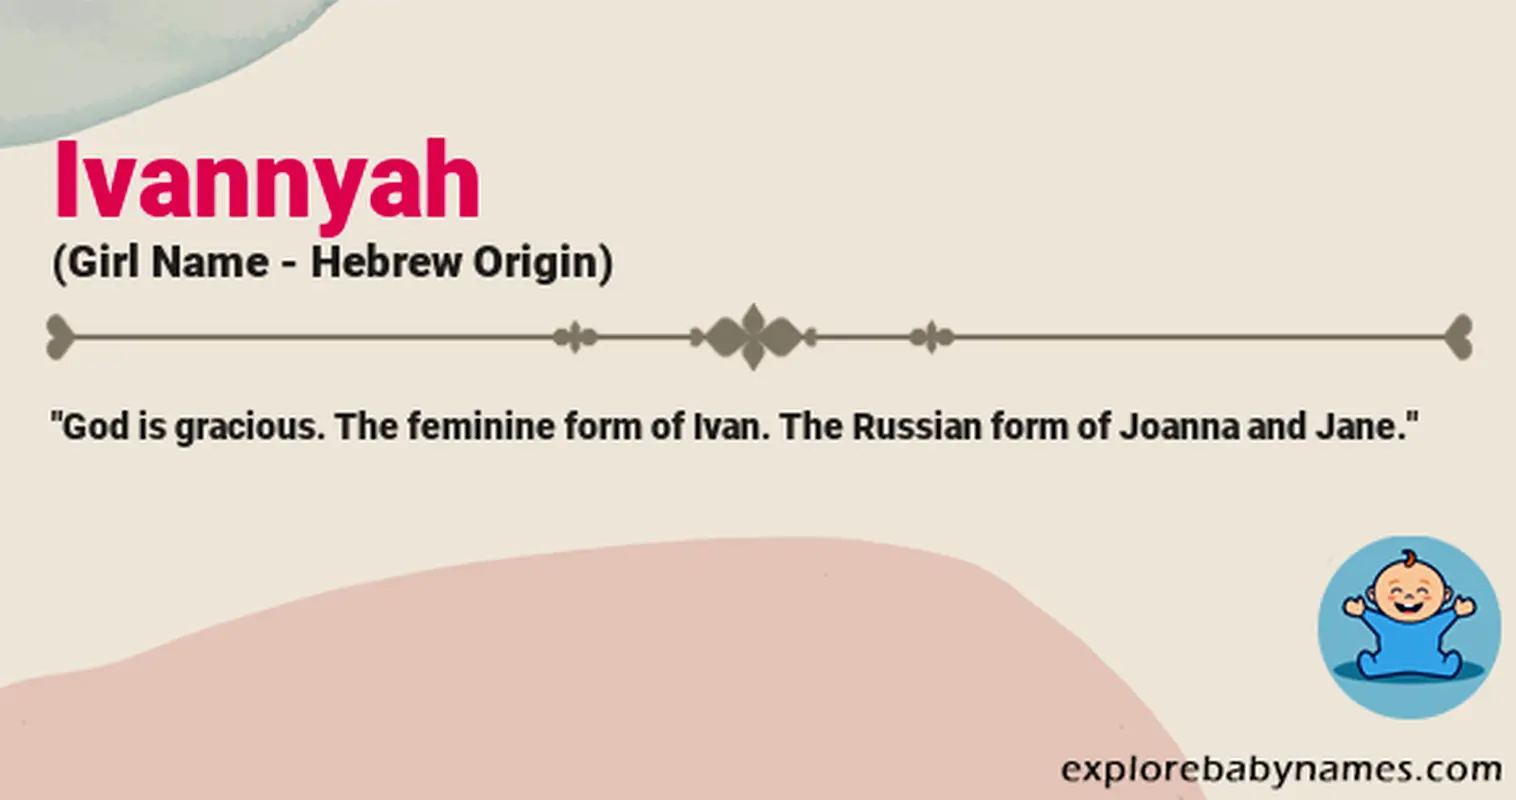 Meaning of Ivannyah